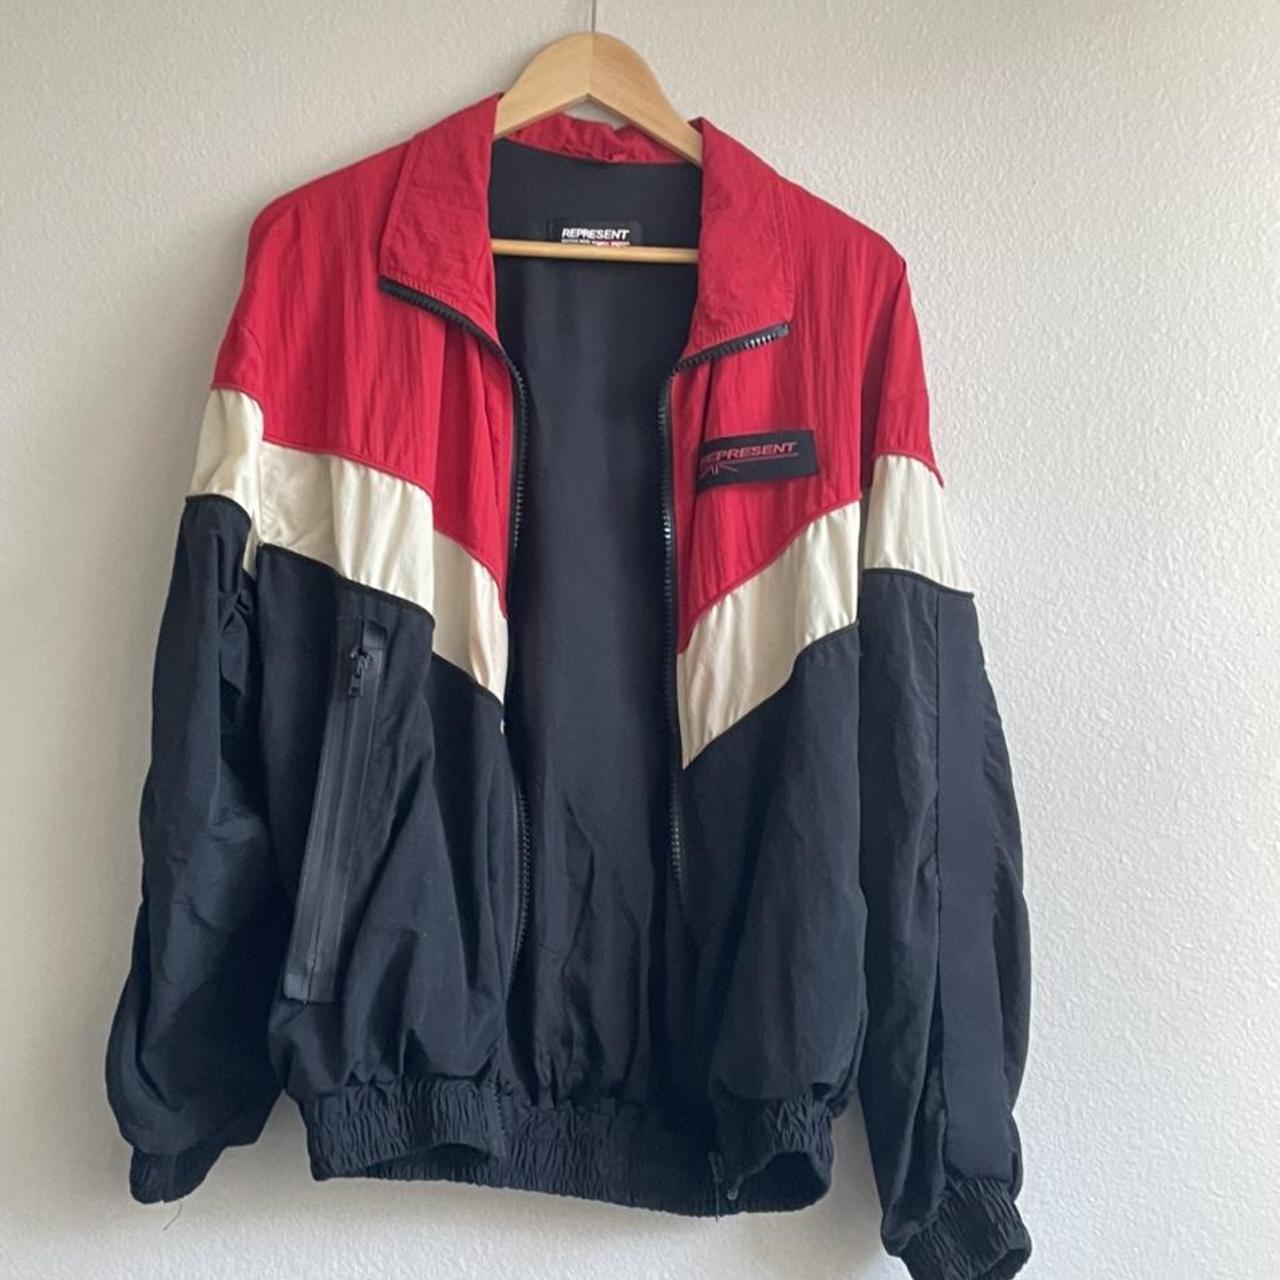 Represent Clo Track Jacket Size XS but fits like a... - Depop